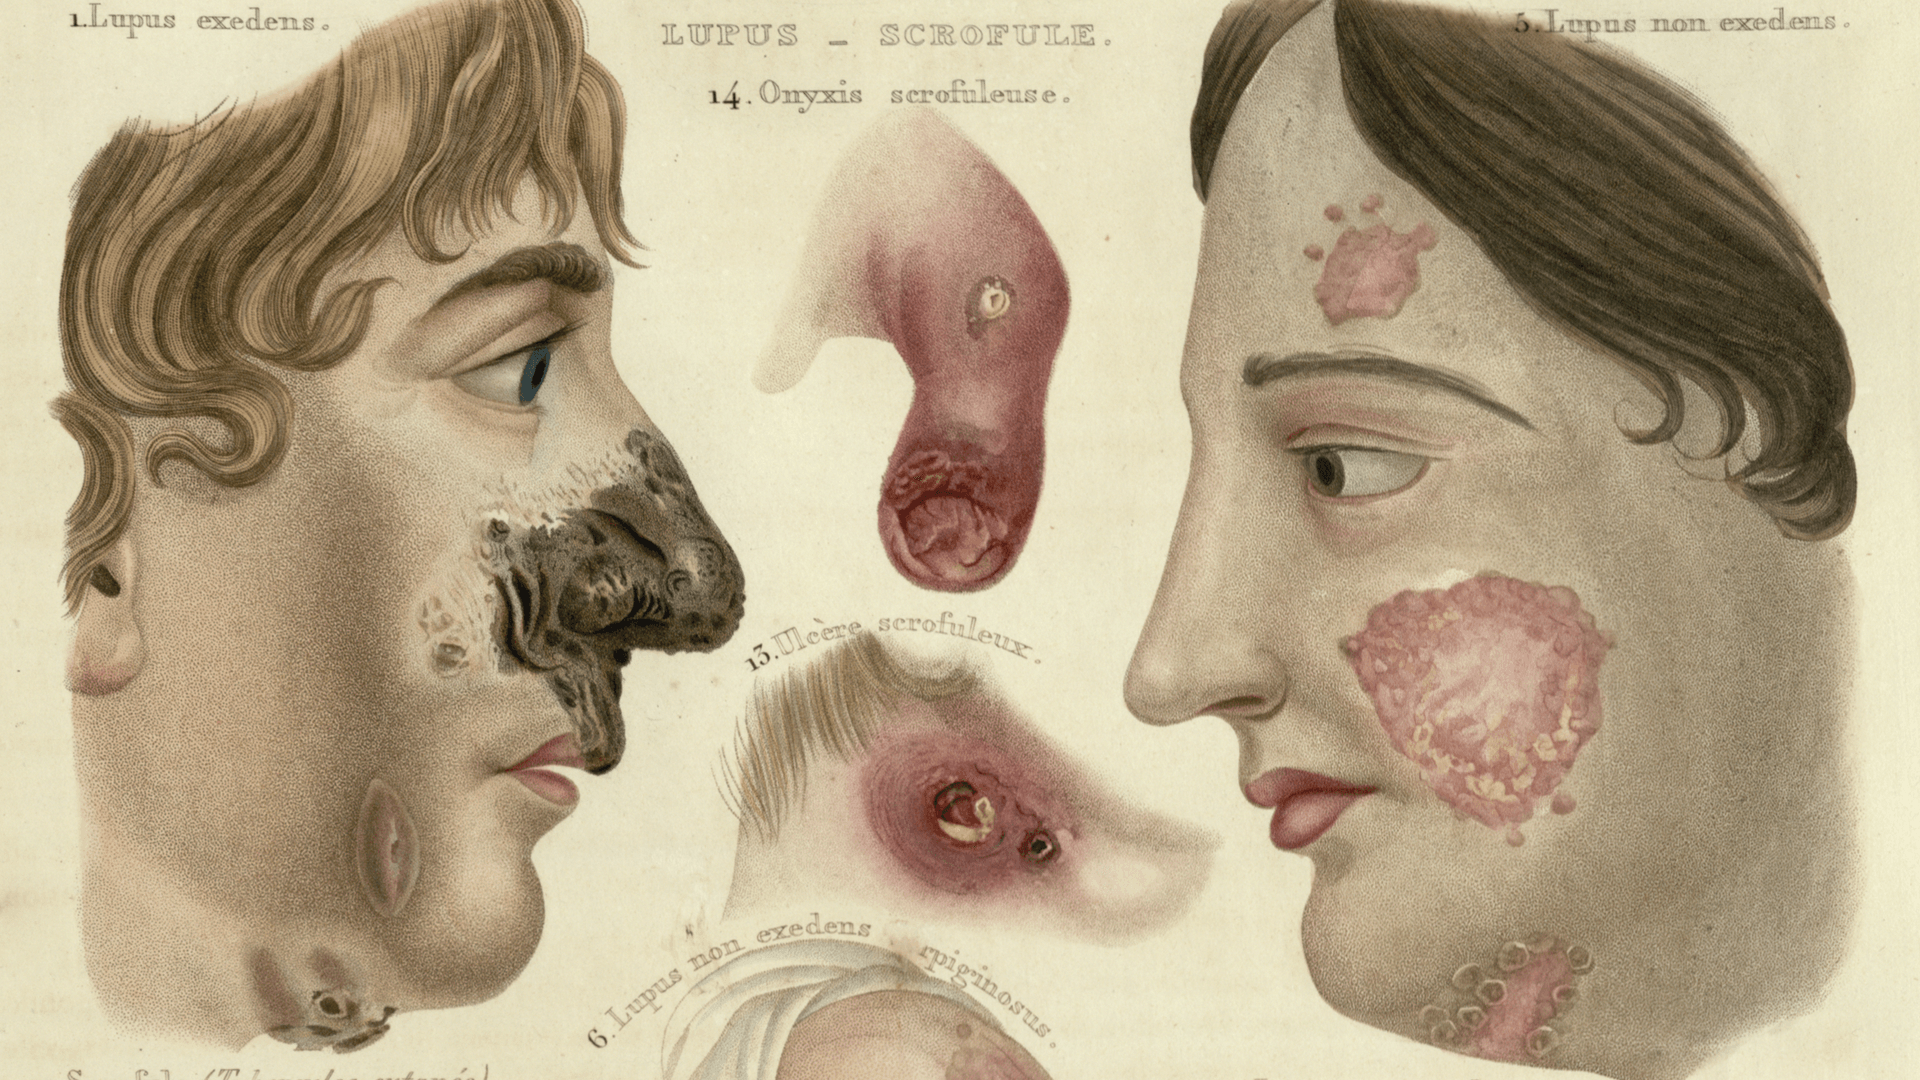 Colorful illustrations of skin damage of various severity 